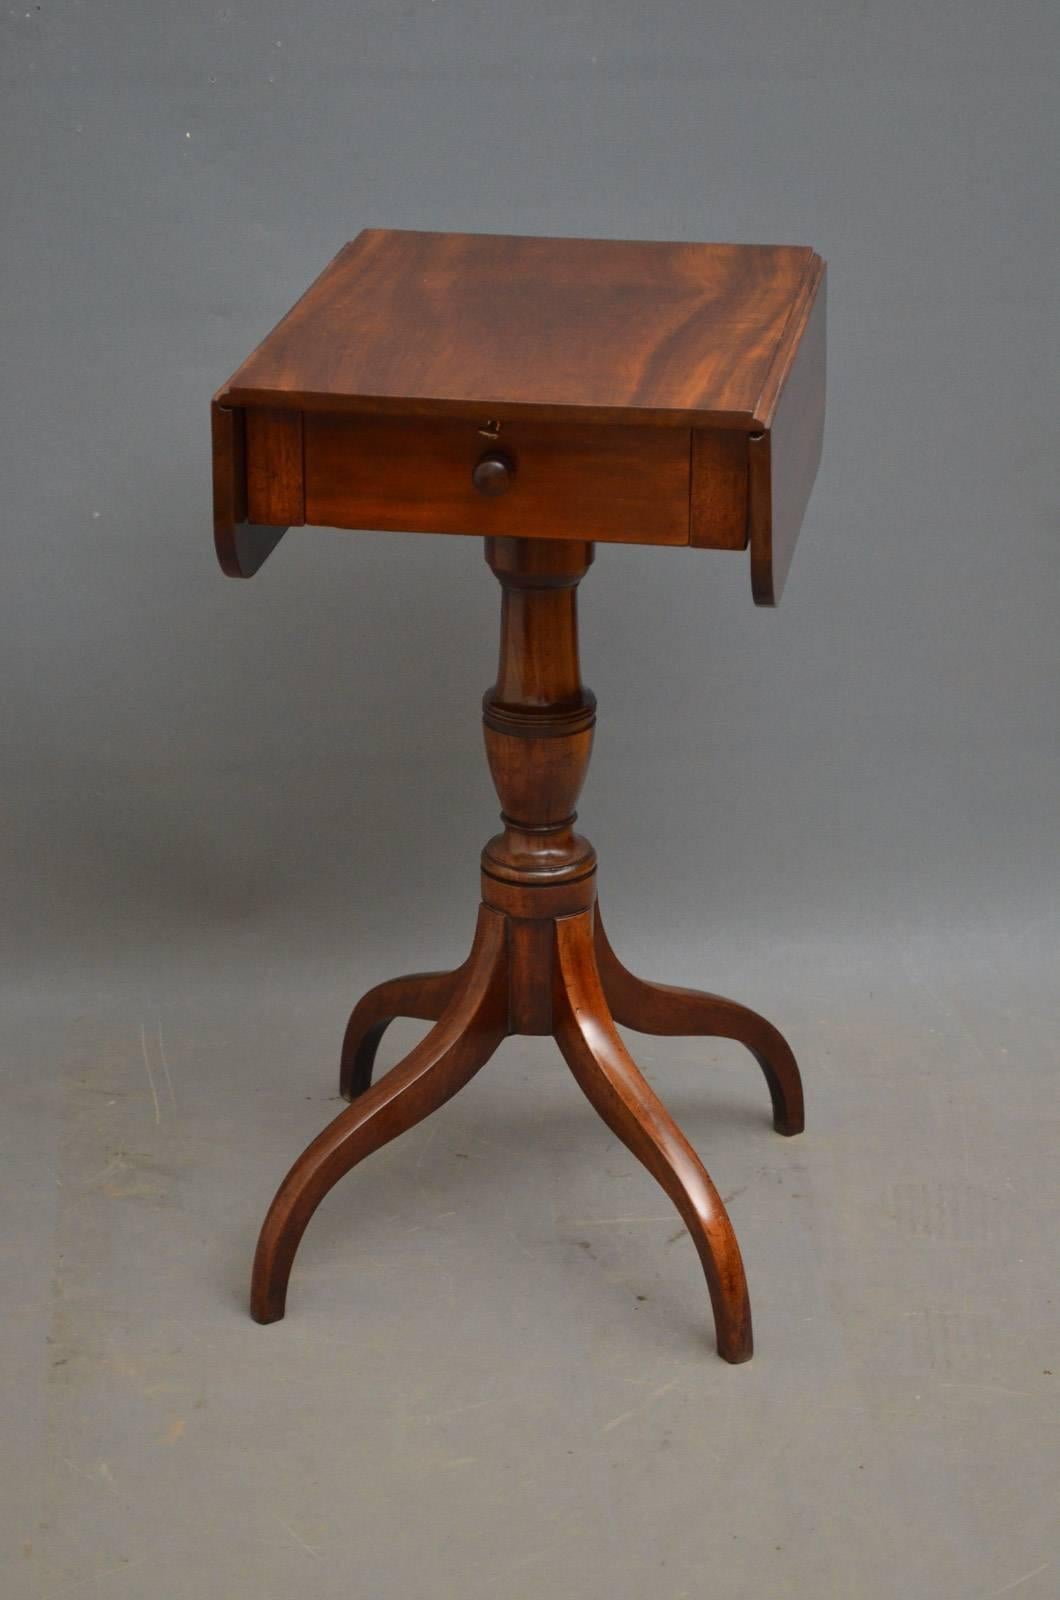 J00 an elegant Regency occasional table, having figured top with two drop leaves above a frieze drawer and turned column termination in three down swept legs. This antique table is in home ready condition, circa 1820
Measure: H 27.5? x W 13.5? x W